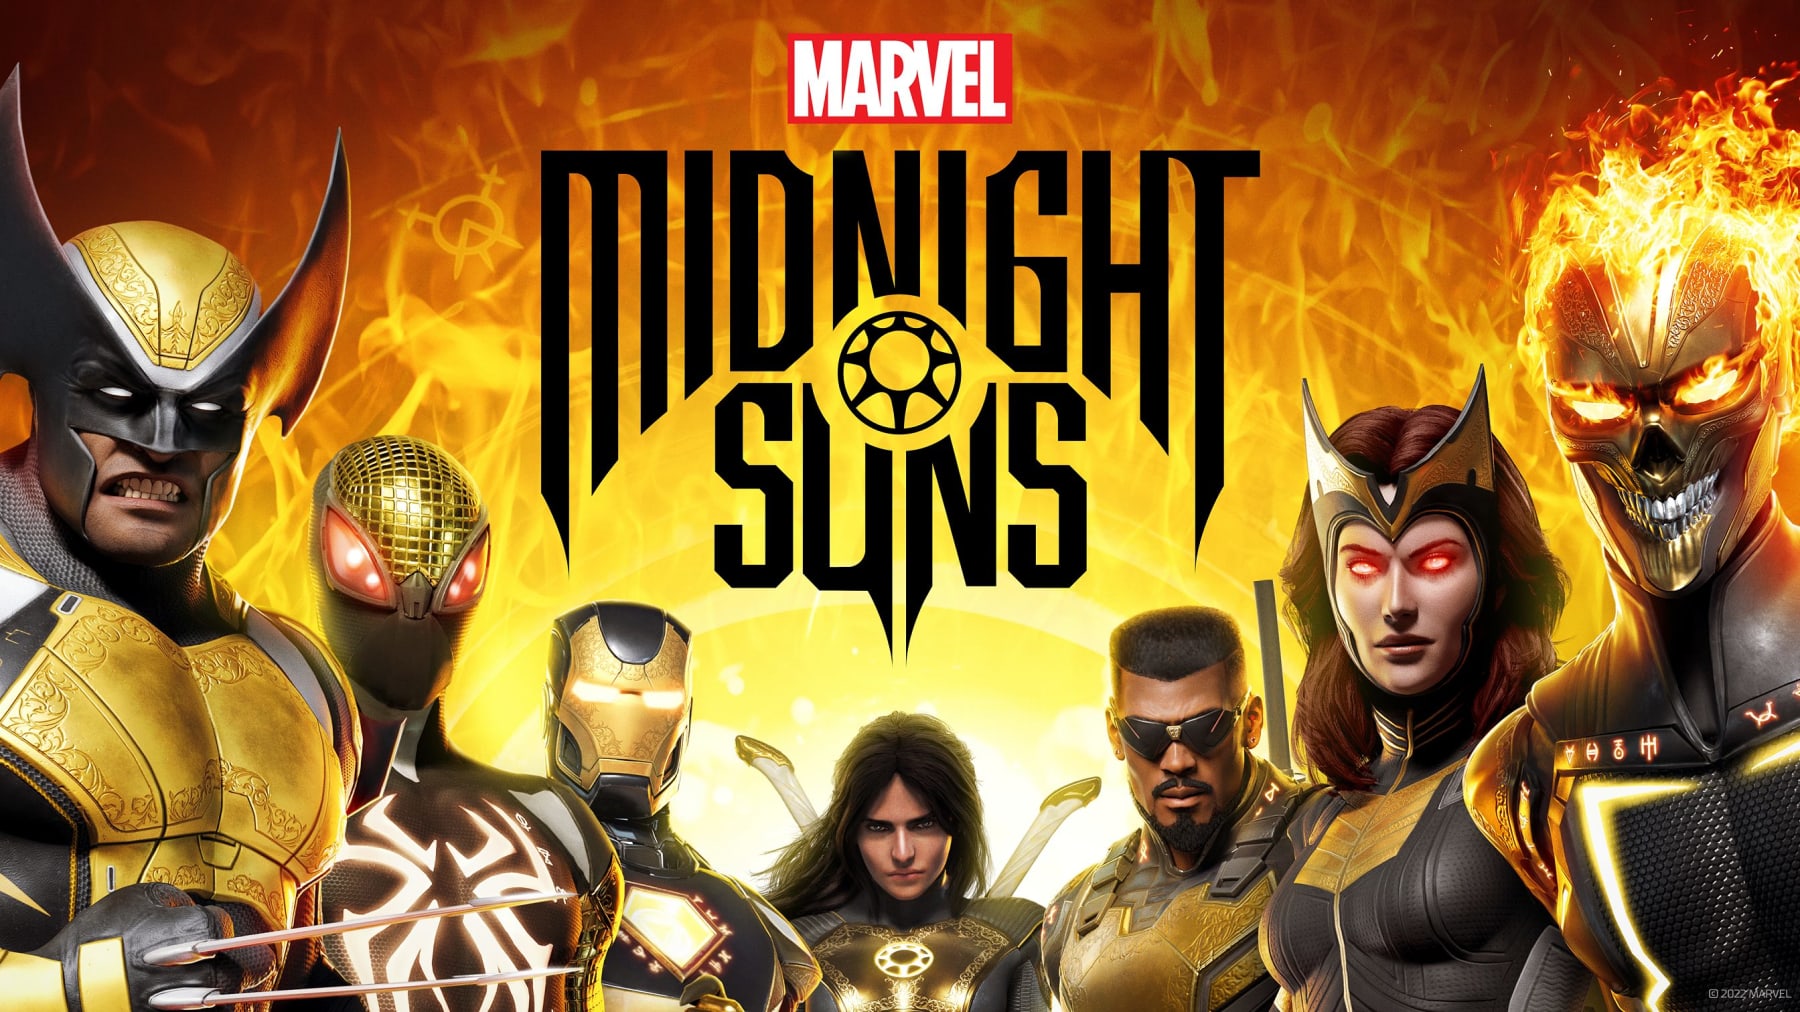 Marvel's Midnight Suns review — The thinking person's Avengers